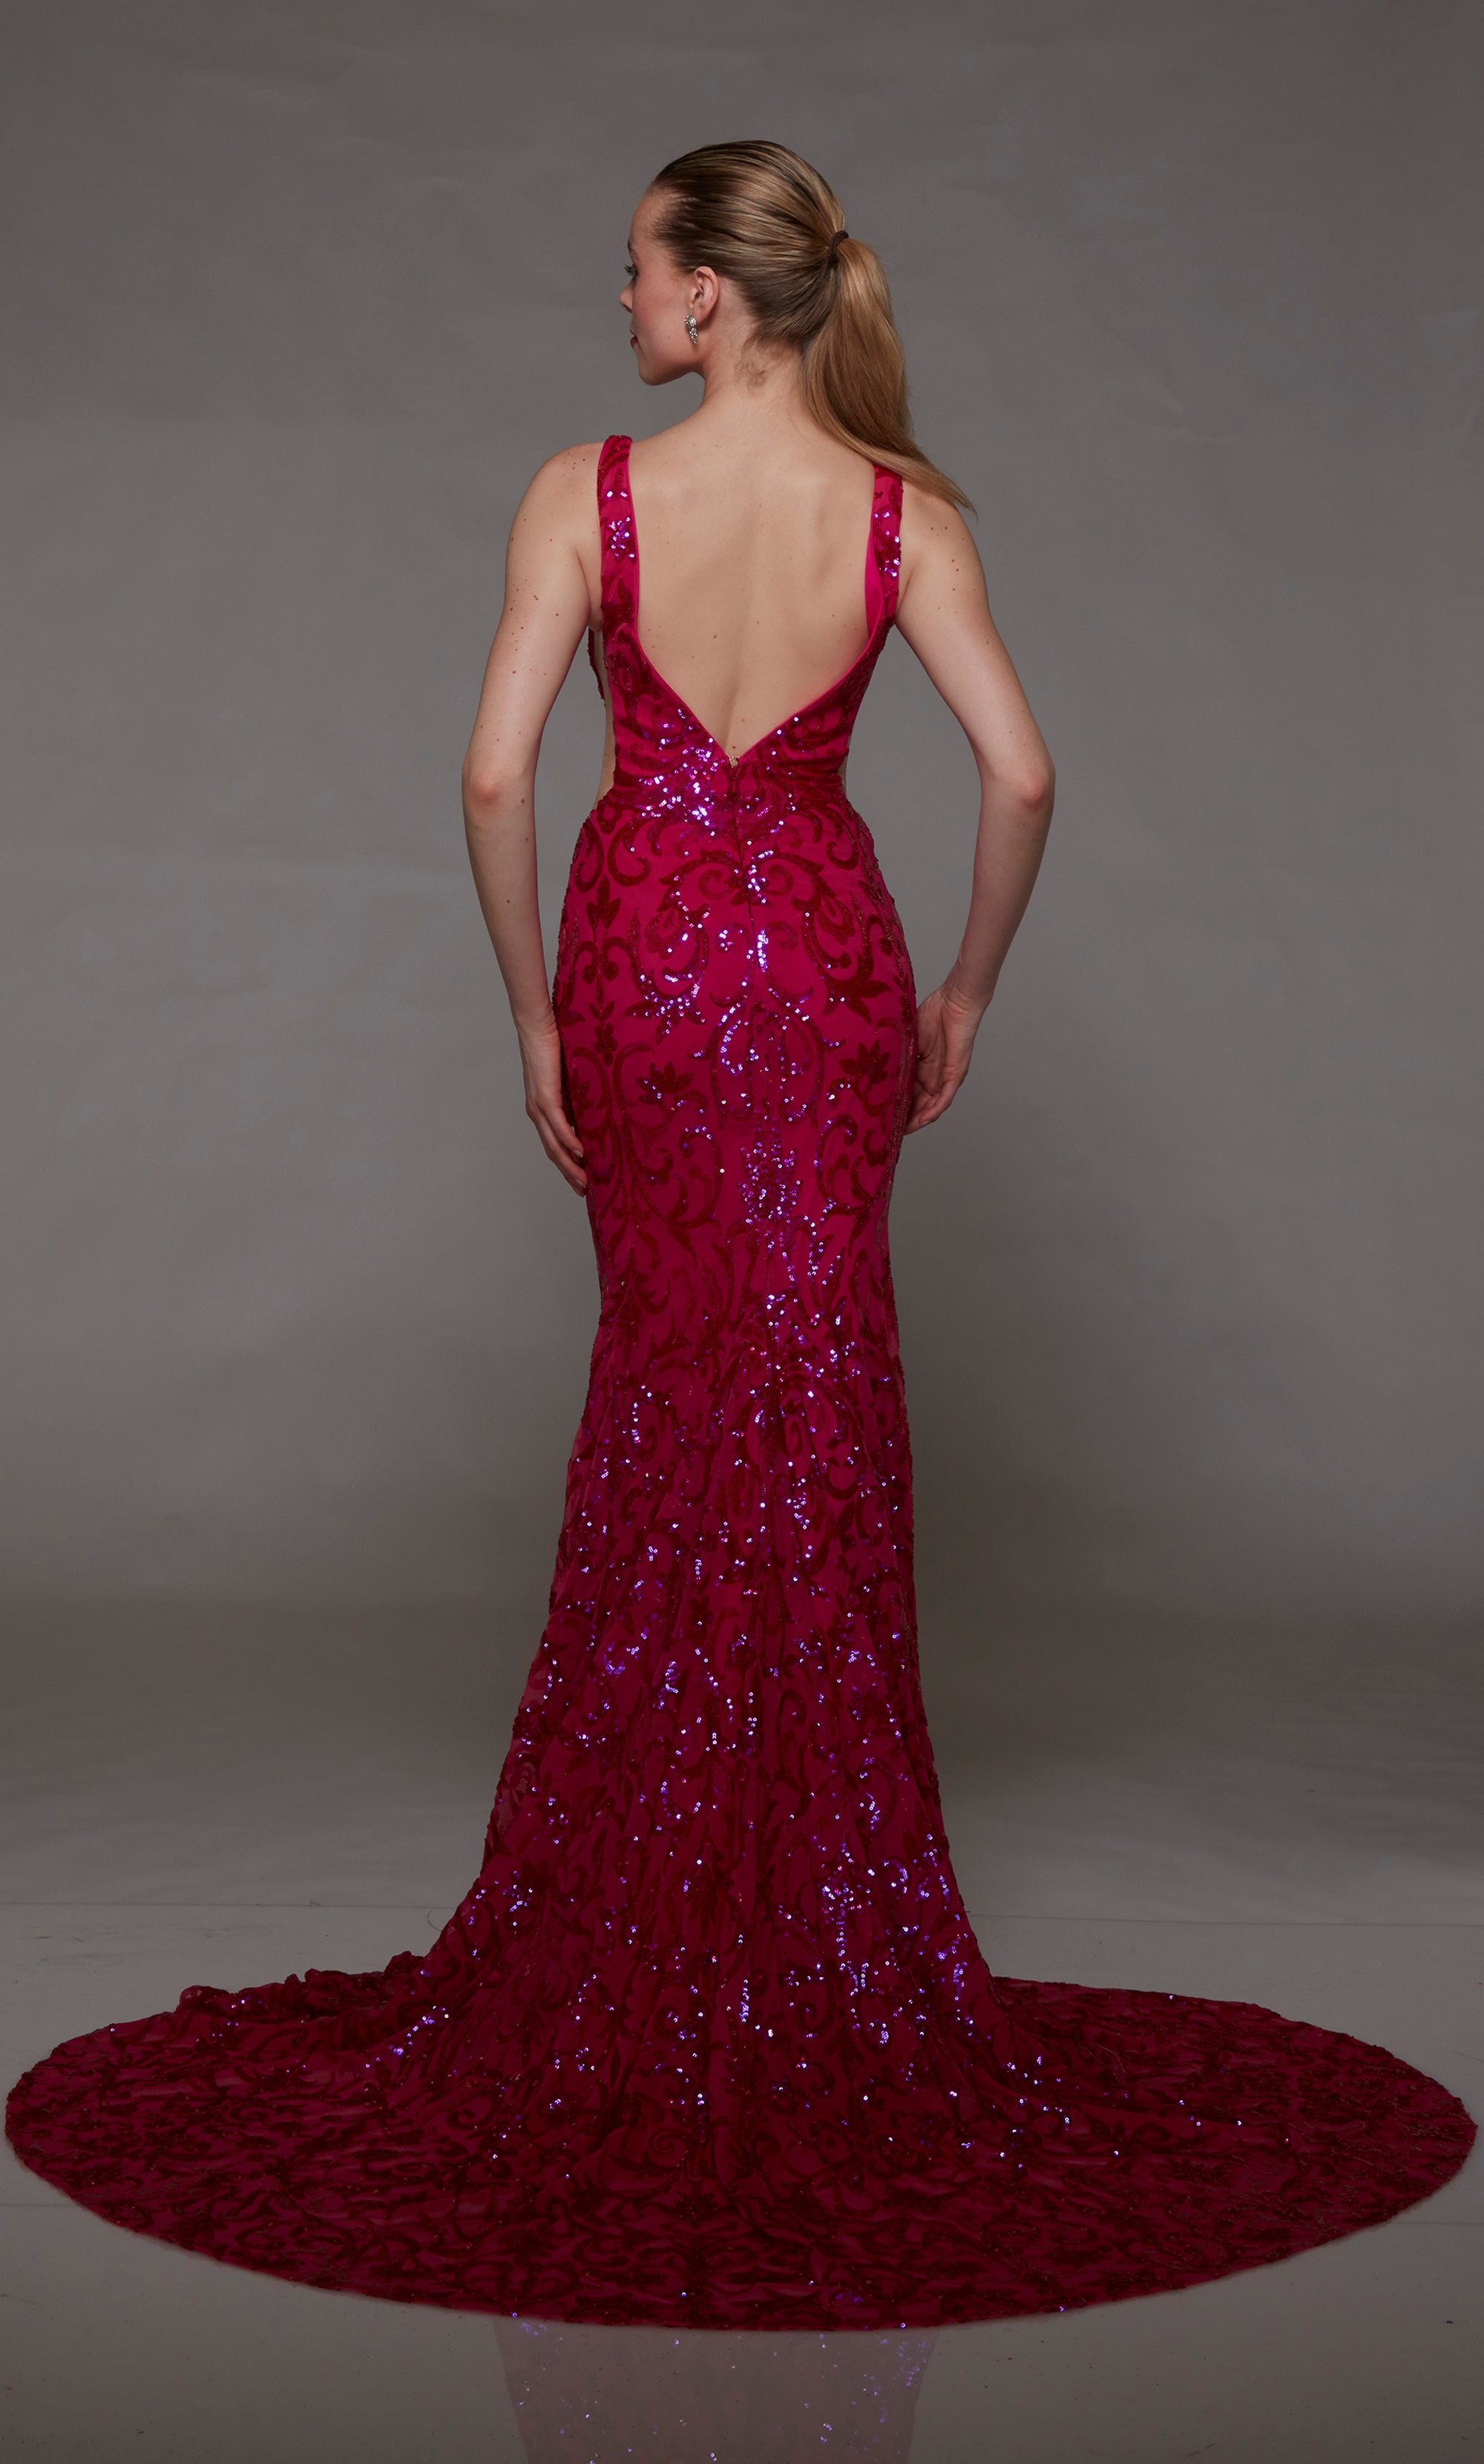 Chic formal gown with an plunging neckline and delicate sequin embellishments in captivating raspberry pink color.